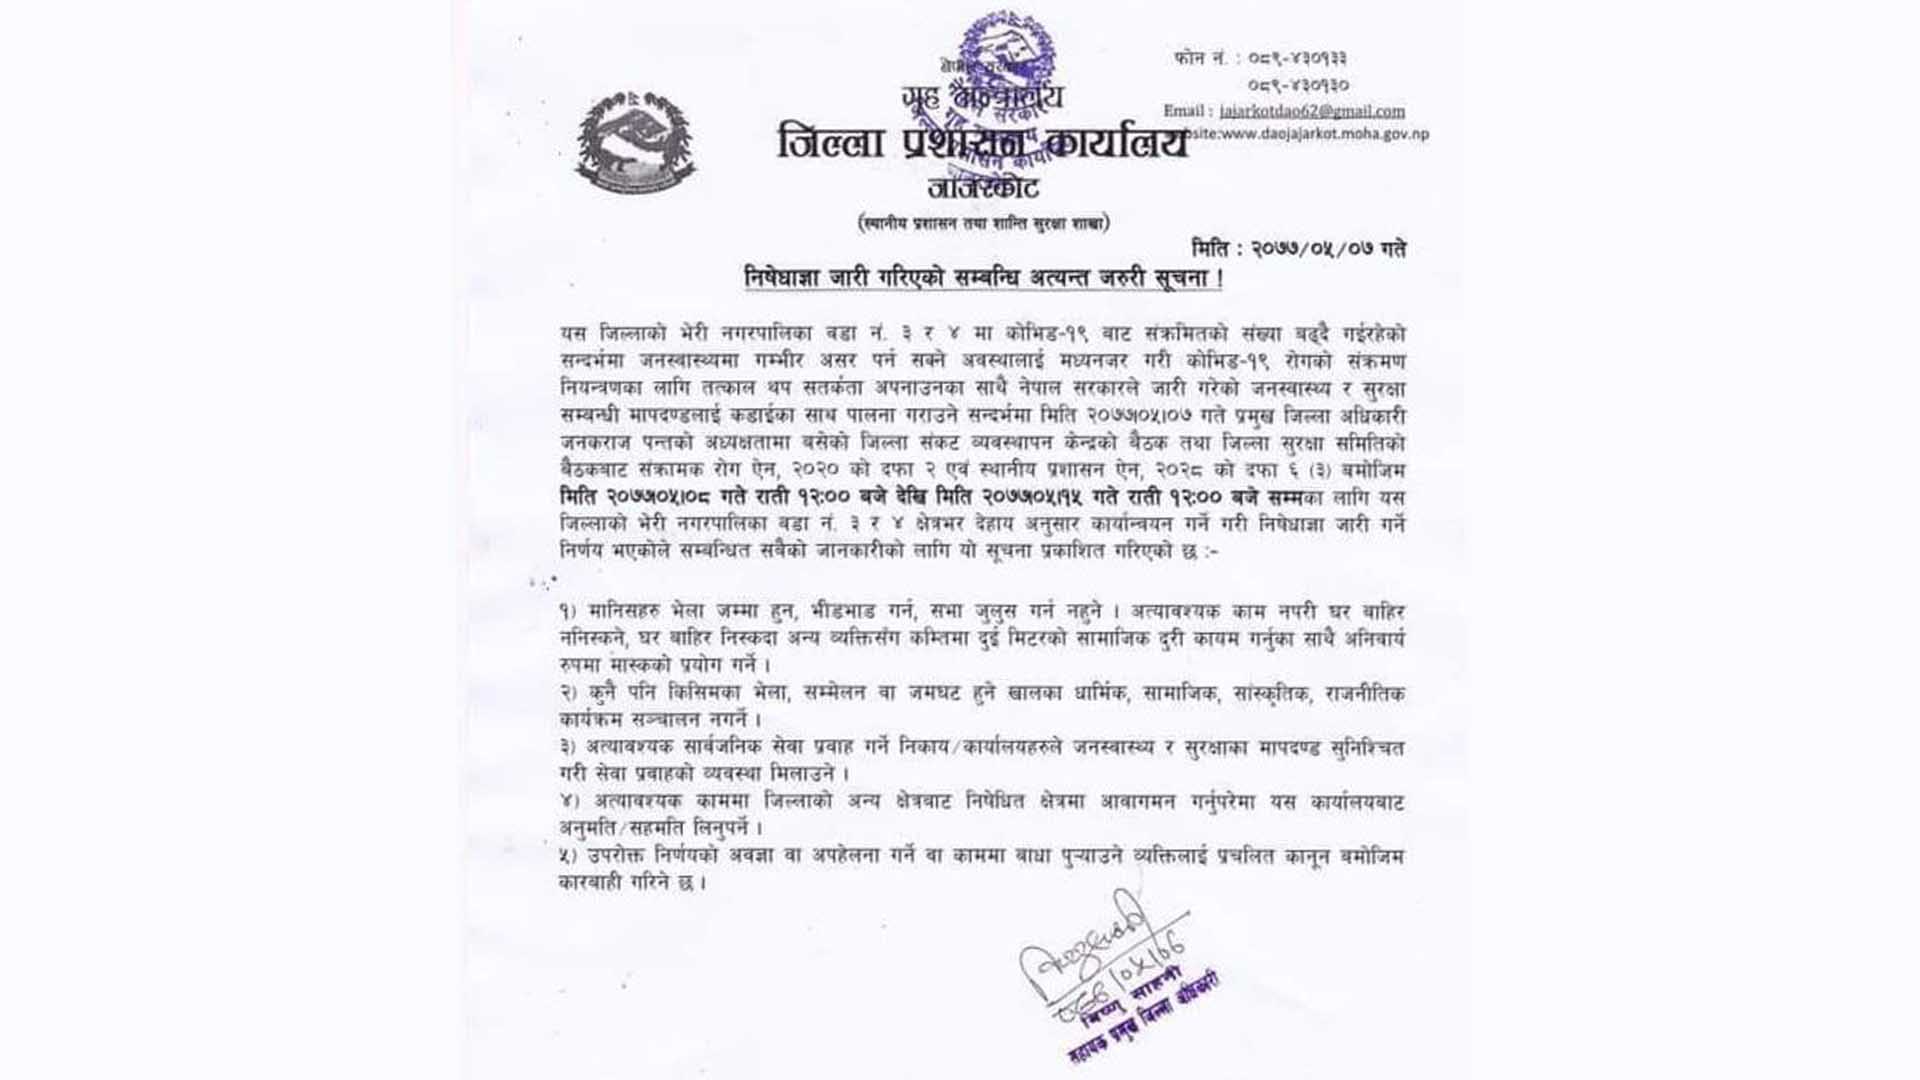 Restrictions imposed in Khalanga of Jajarkot after army, police, and civil servants infected with Covid-19